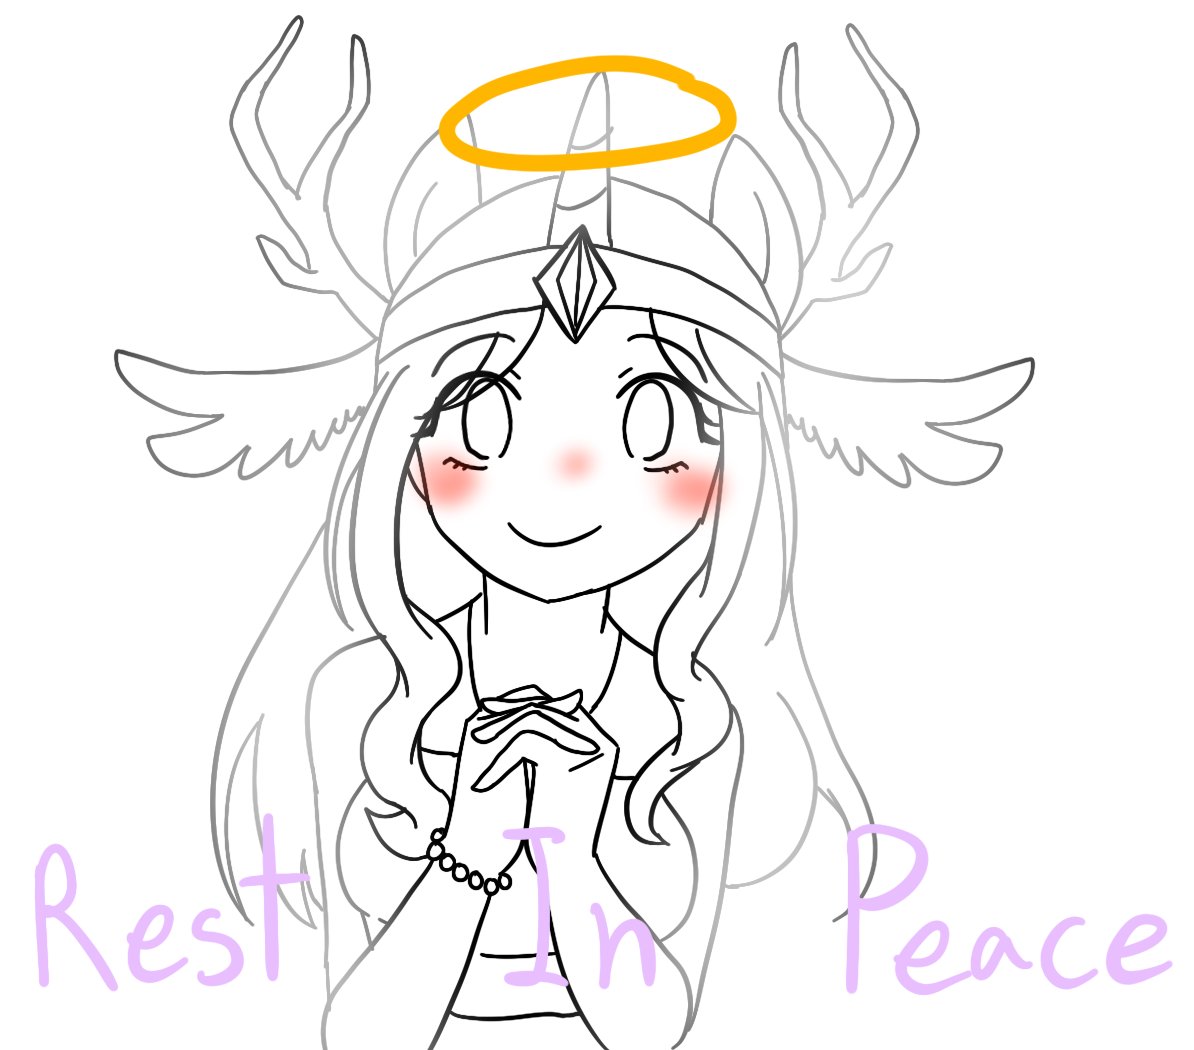 Pupe Purplerose Commission Closed On Twitter I Don T Have Much - lizzy winkle roblox username